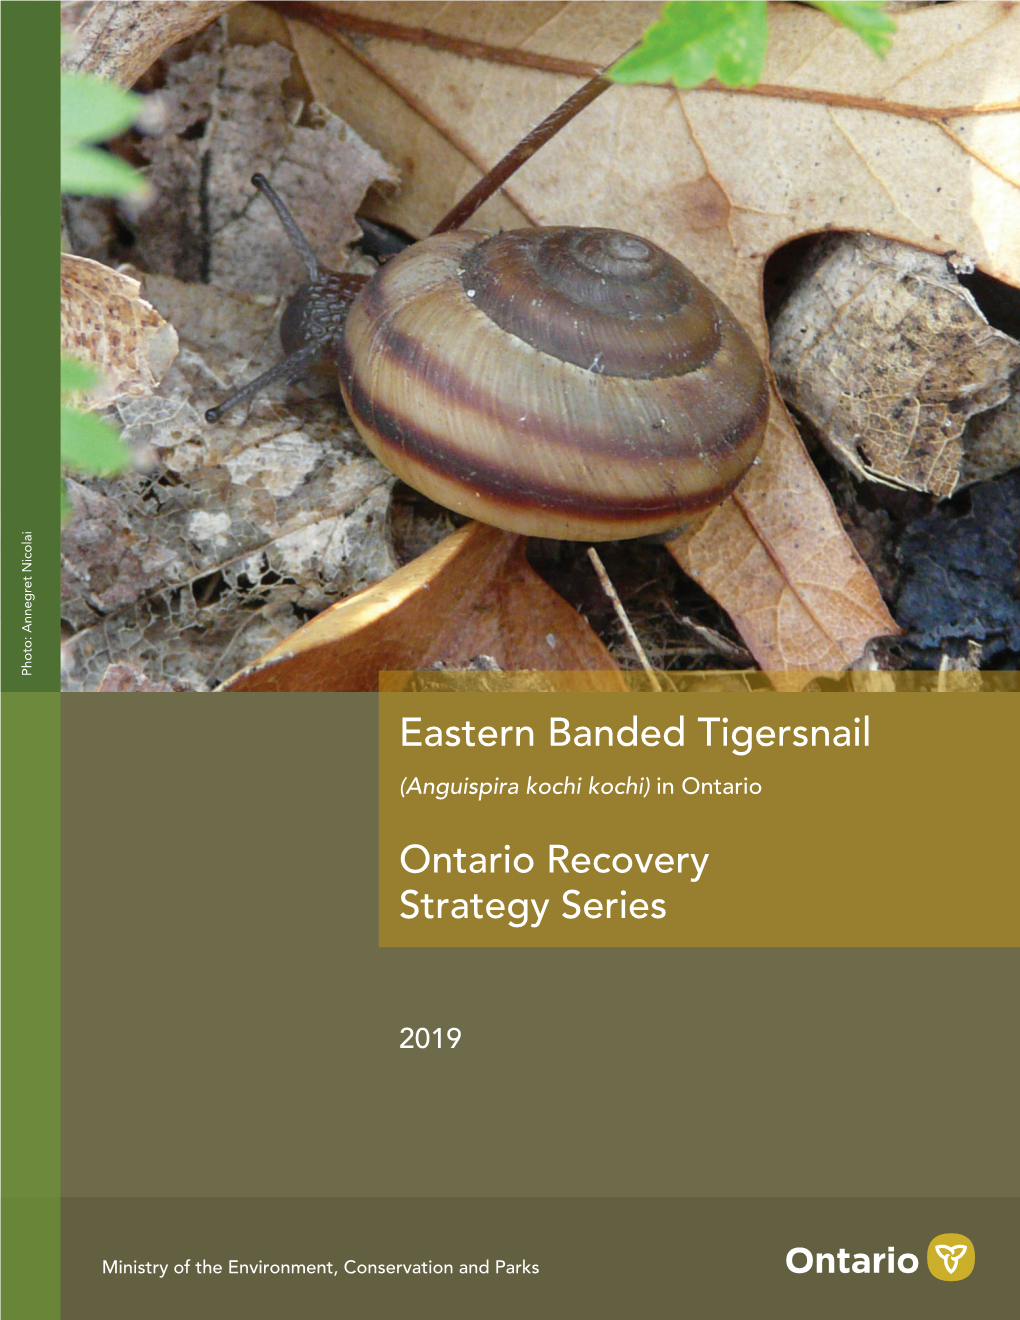 Recovery Strategy for the Eastern Banded Tigersnail (Anguispira Kochi Kochi) in Ontario